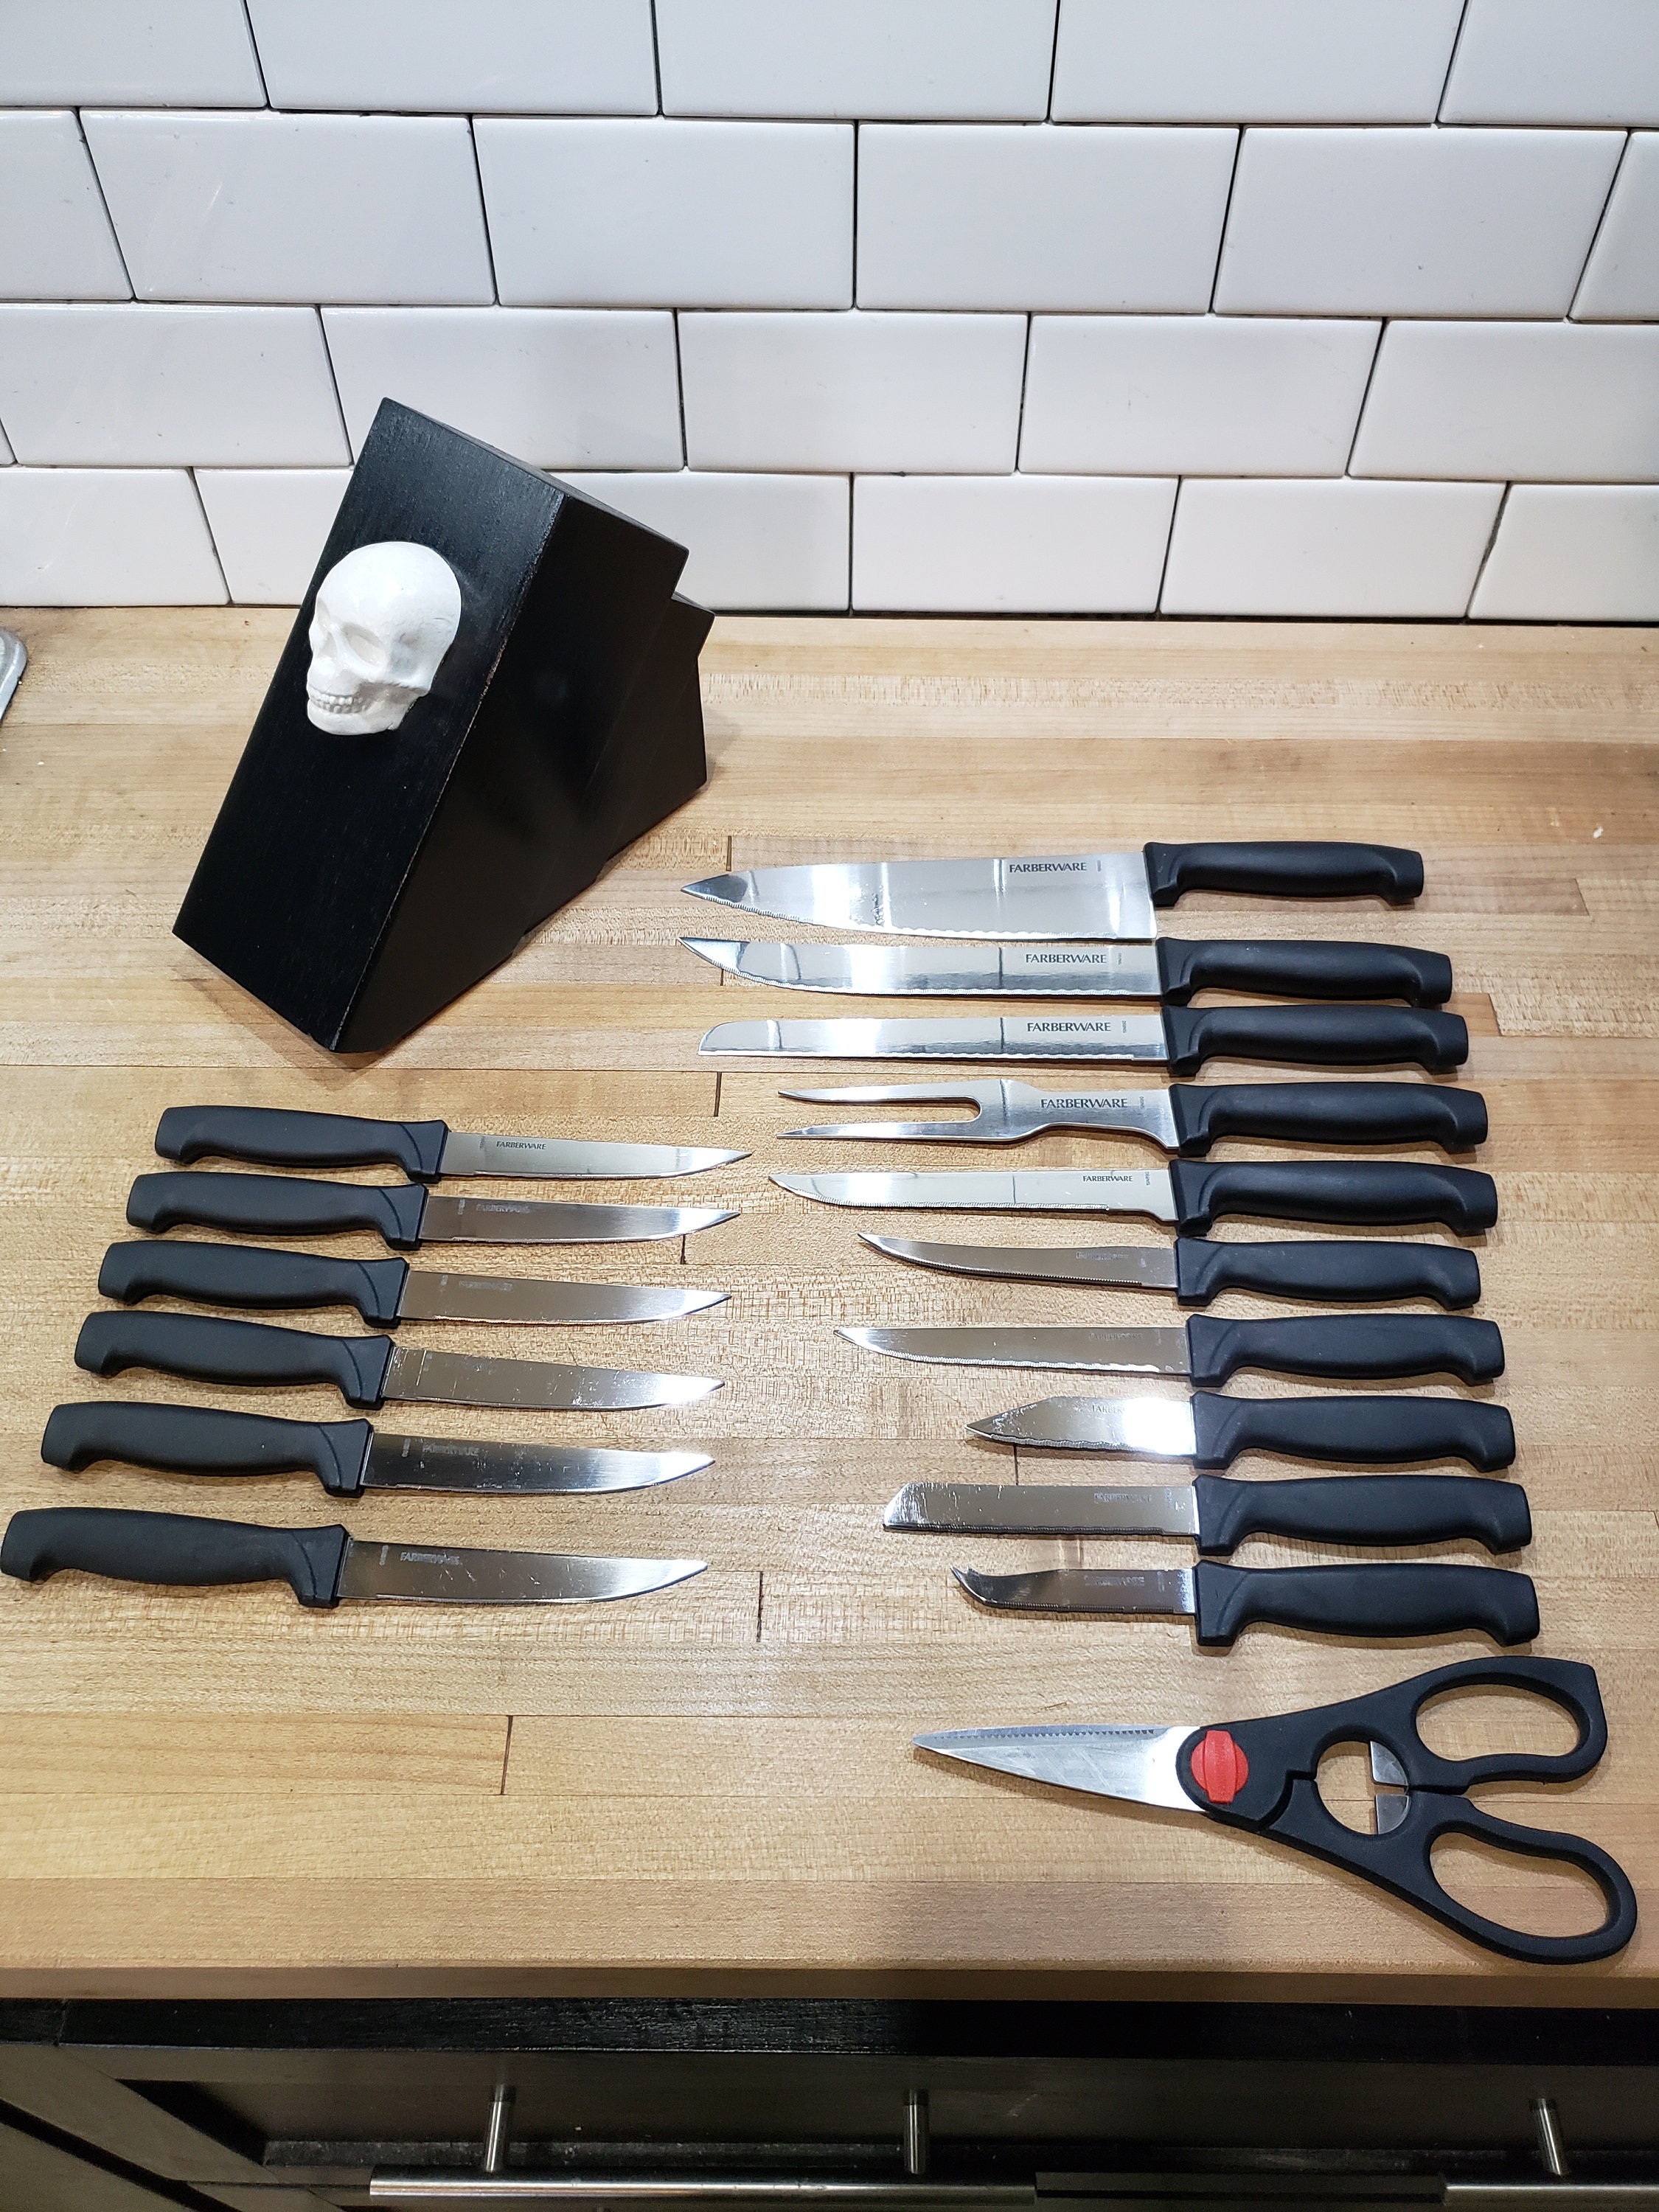 White Skull Kitchen Knife Block Available With or Without Knives Solid  Hardwood Goth Creepy Gothic Knife Holder 